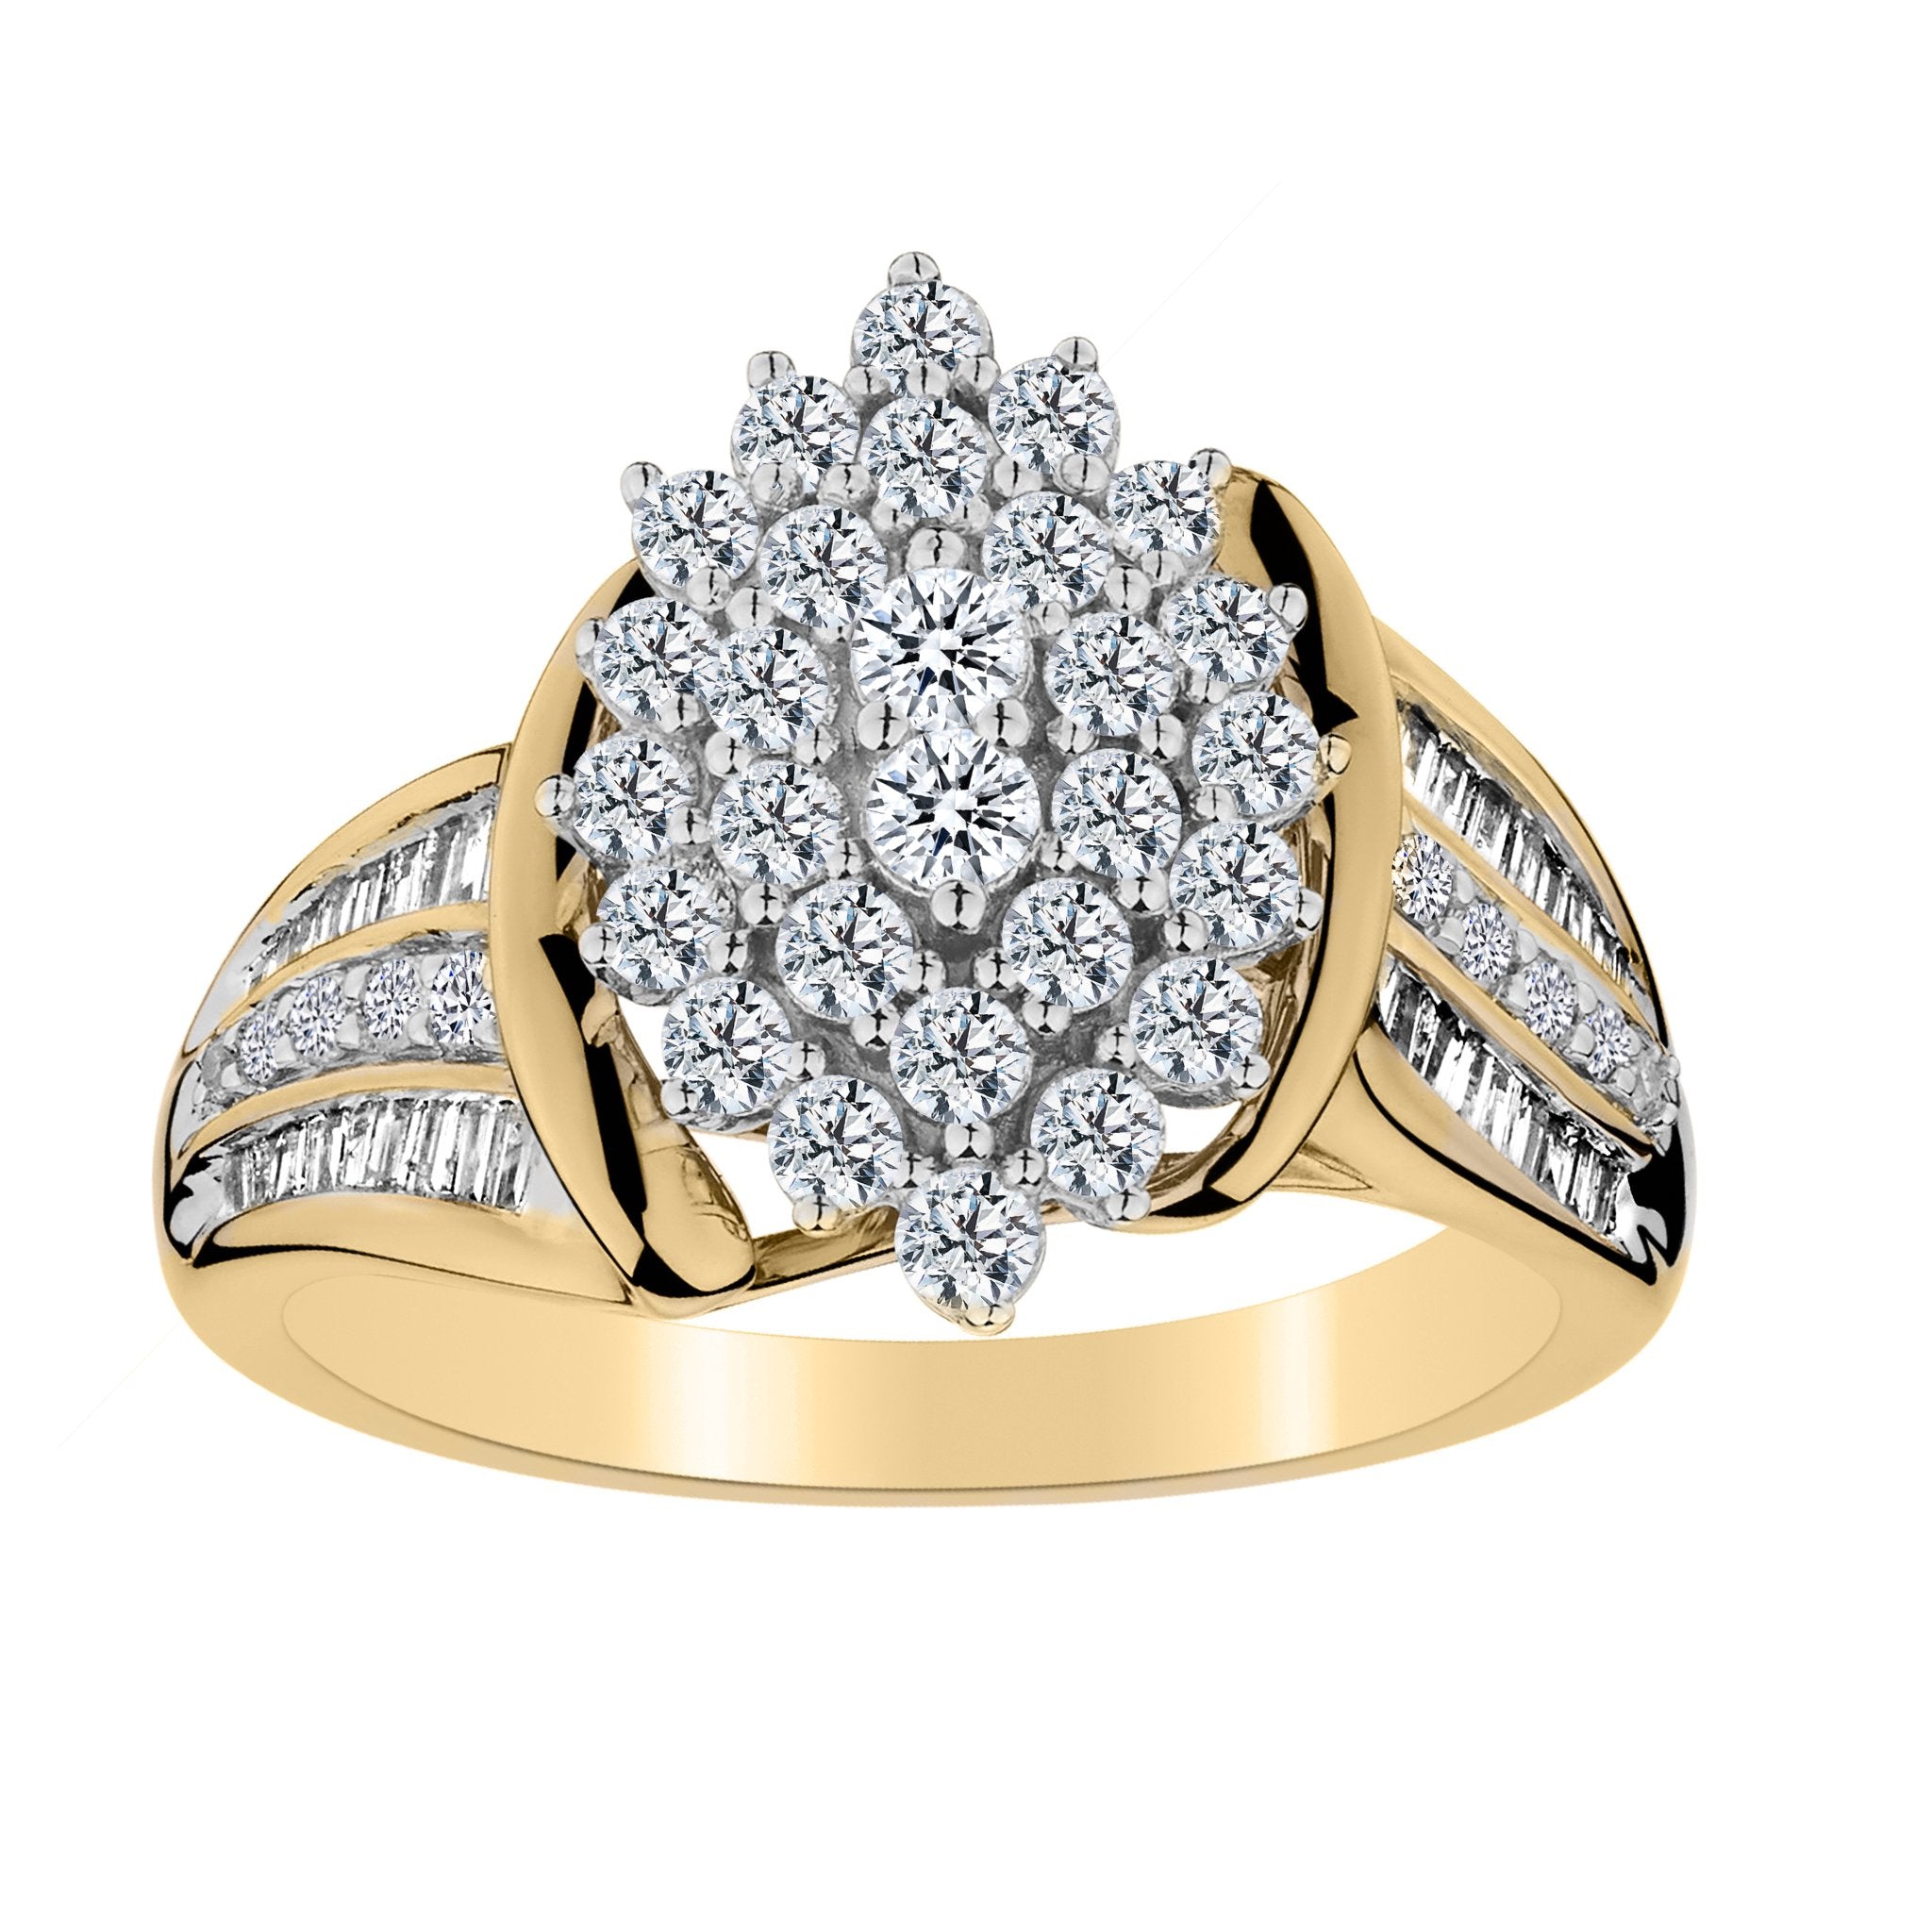 1.00 CARAT DIAMOND RING, 10kt YELLOW GOLD…....................NOW - Griffin Jewellery Designs